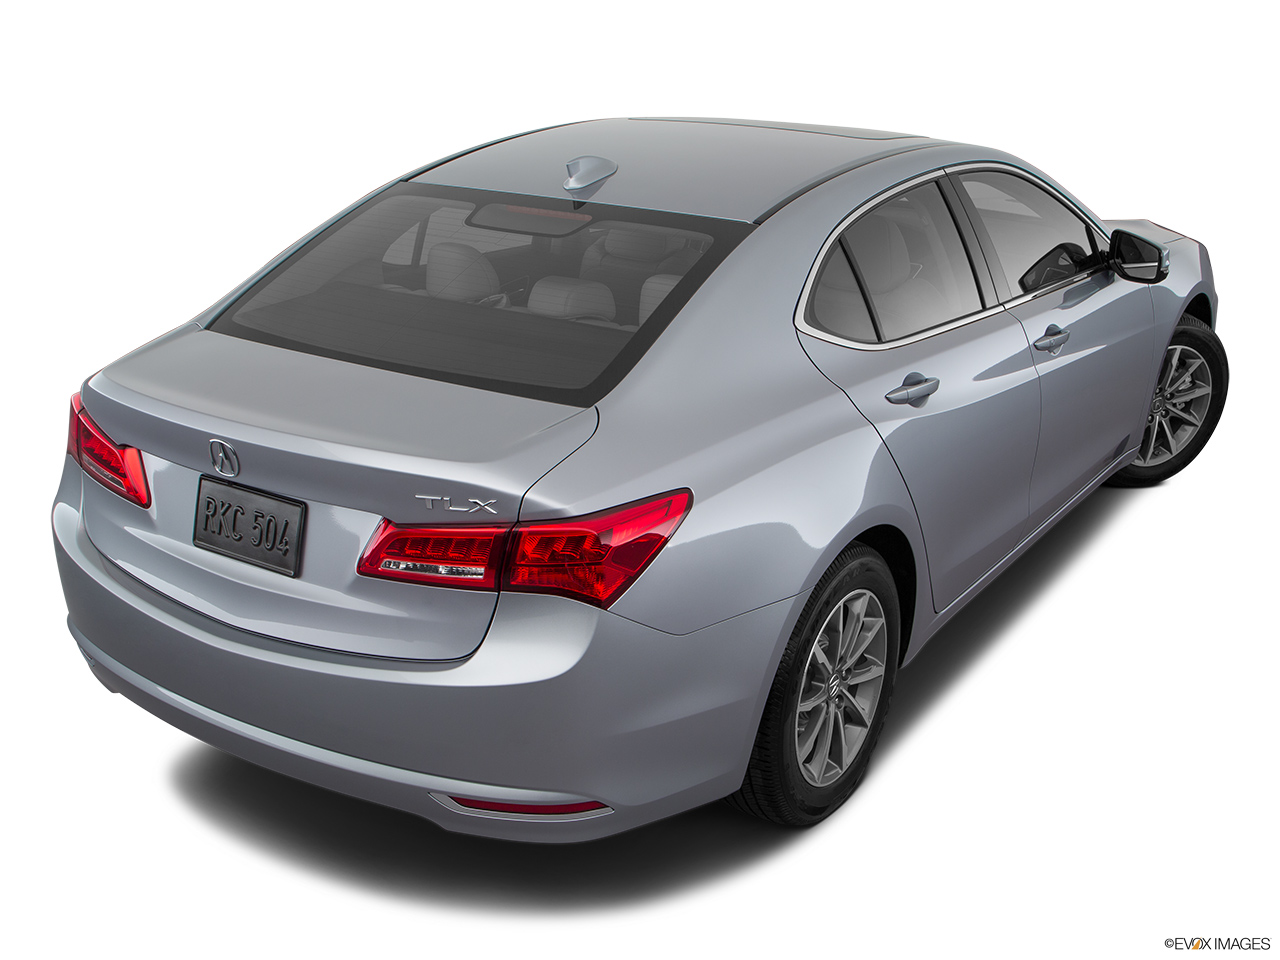 2019 Acura TLX 2.4 8-DCT P-AWS Rear 3/4 angle view. 